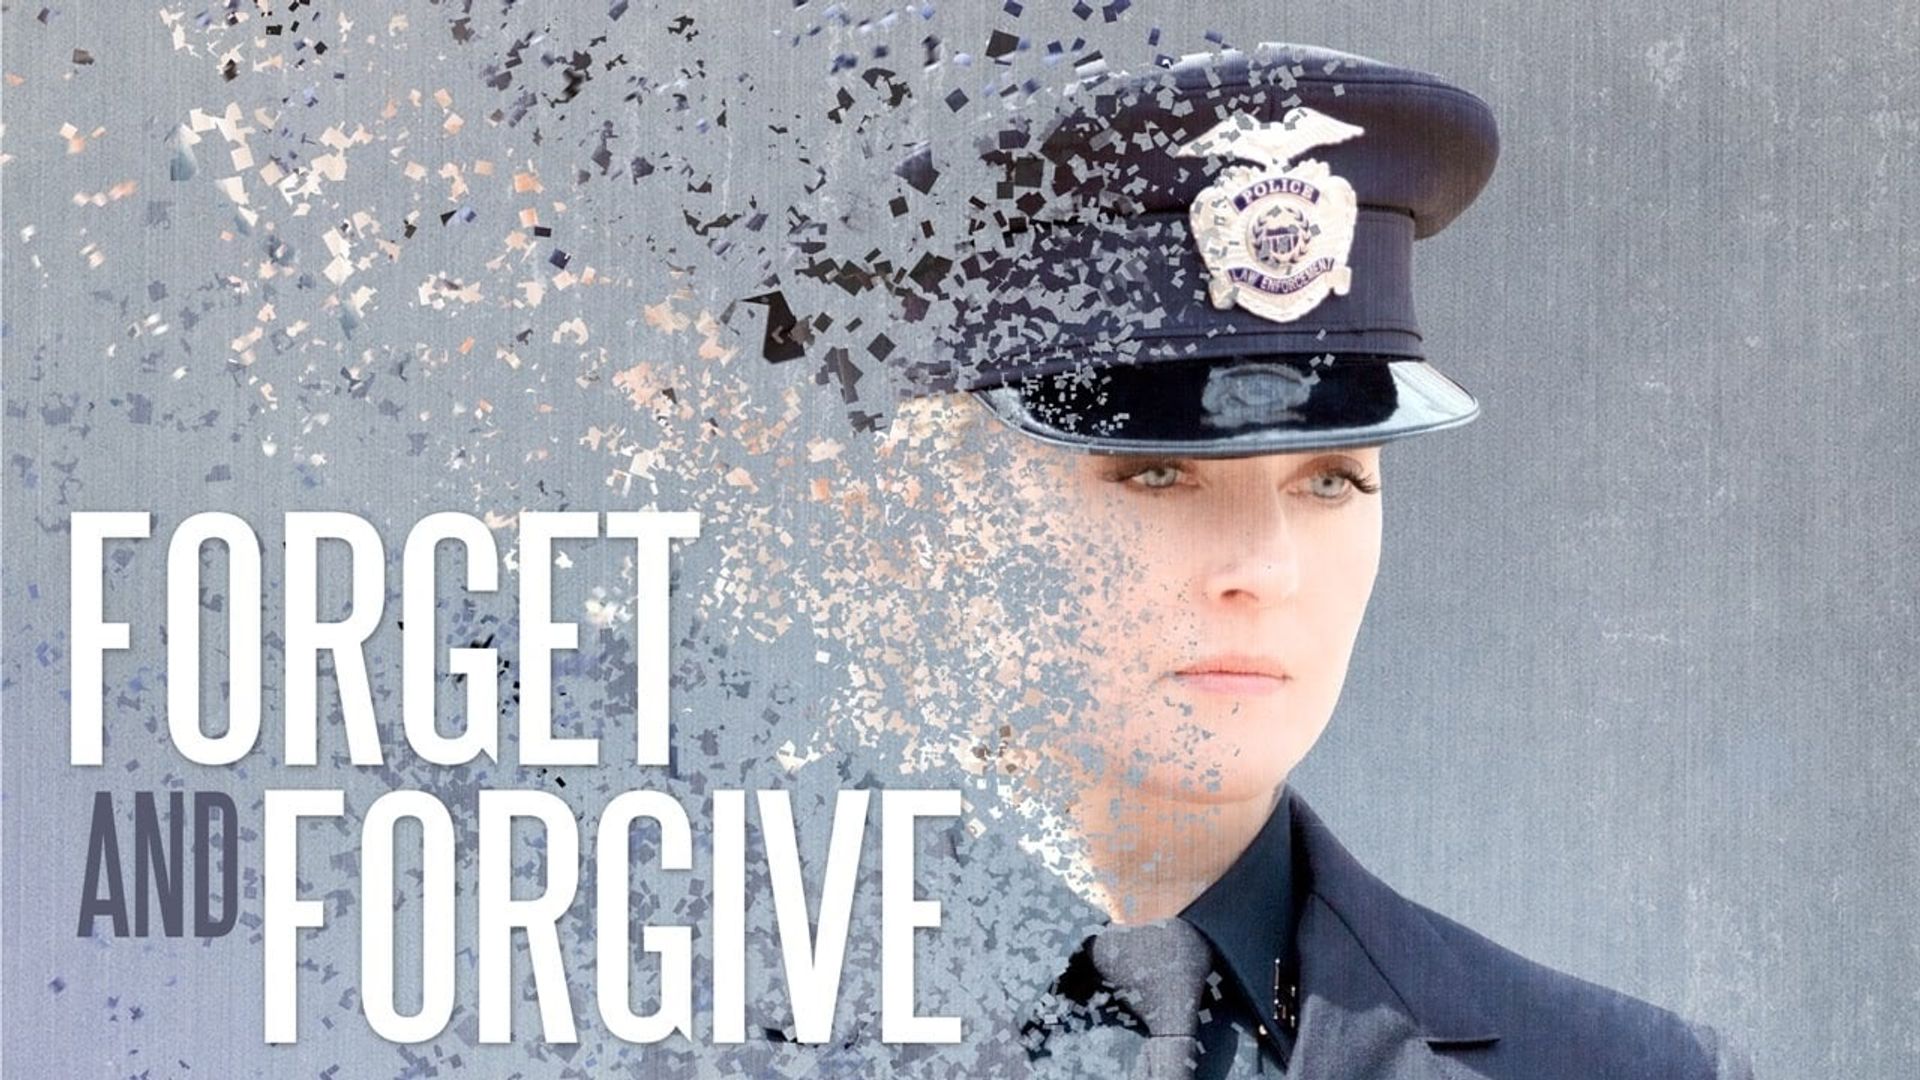 Forget and Forgive background